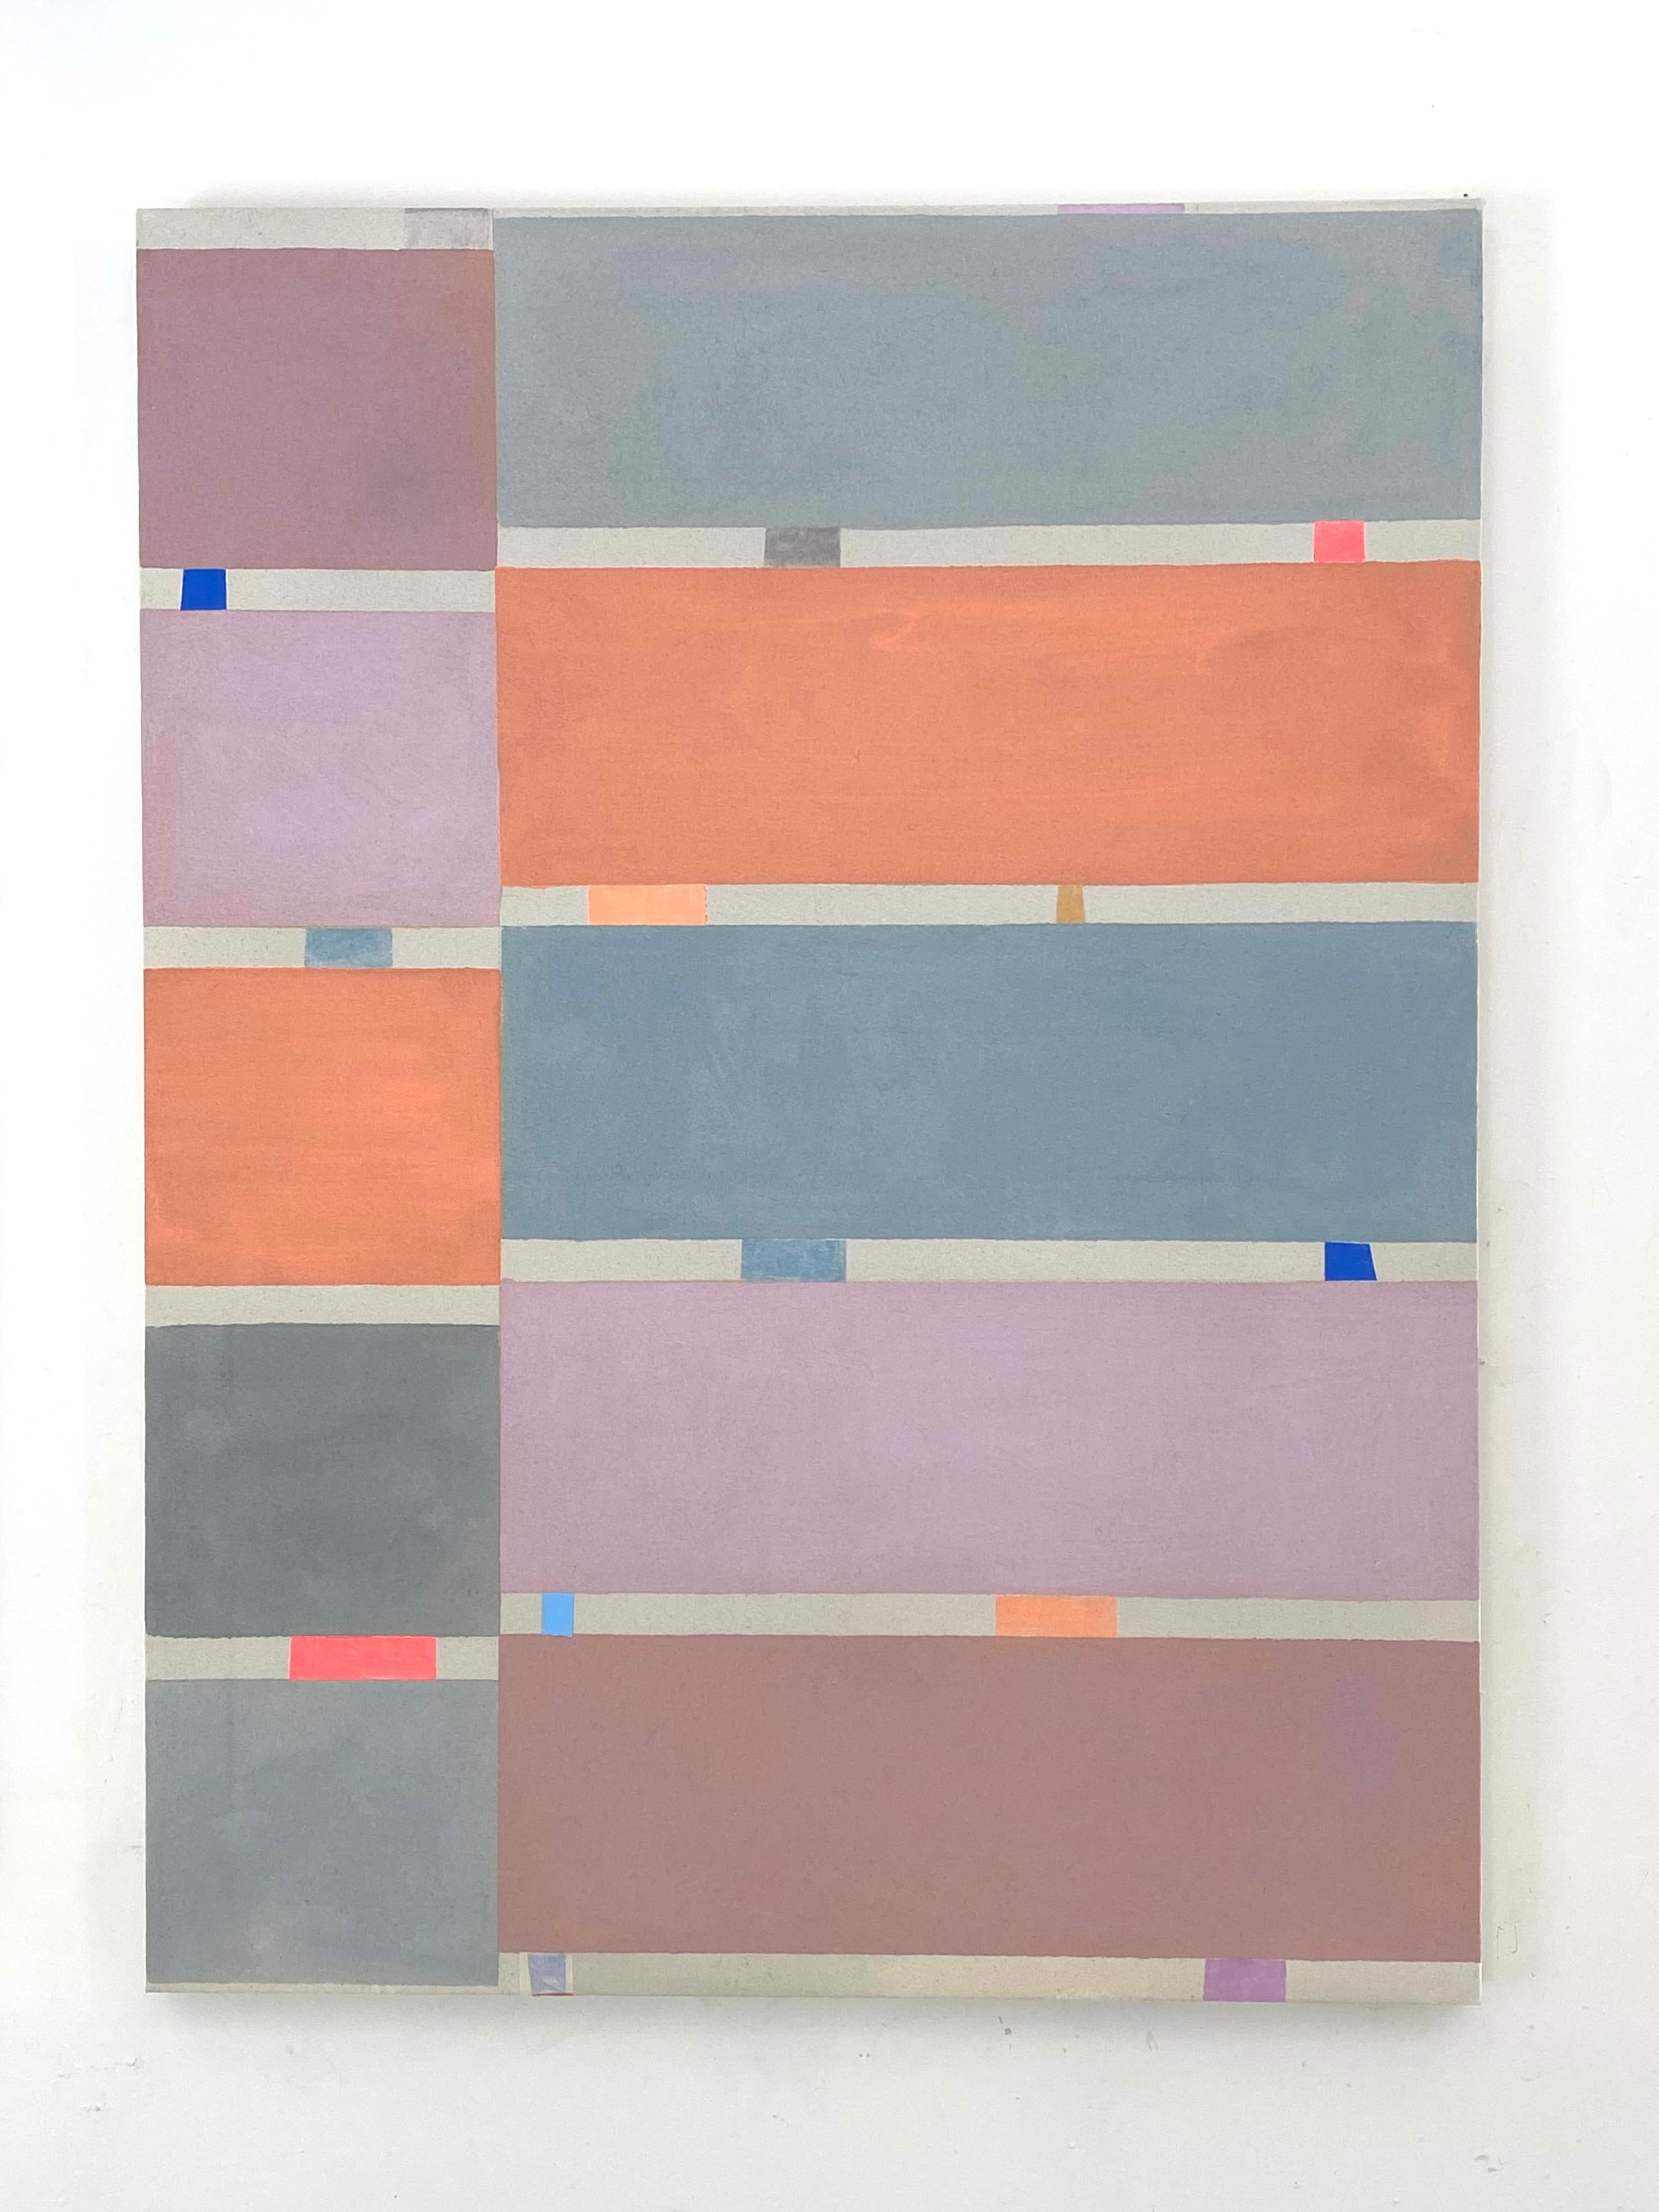 Grayviolet, Geometric Abstract, Orange Peach, Gray, Violet, Lilac Purple Stripes - Painting by Elizabeth Gourlay